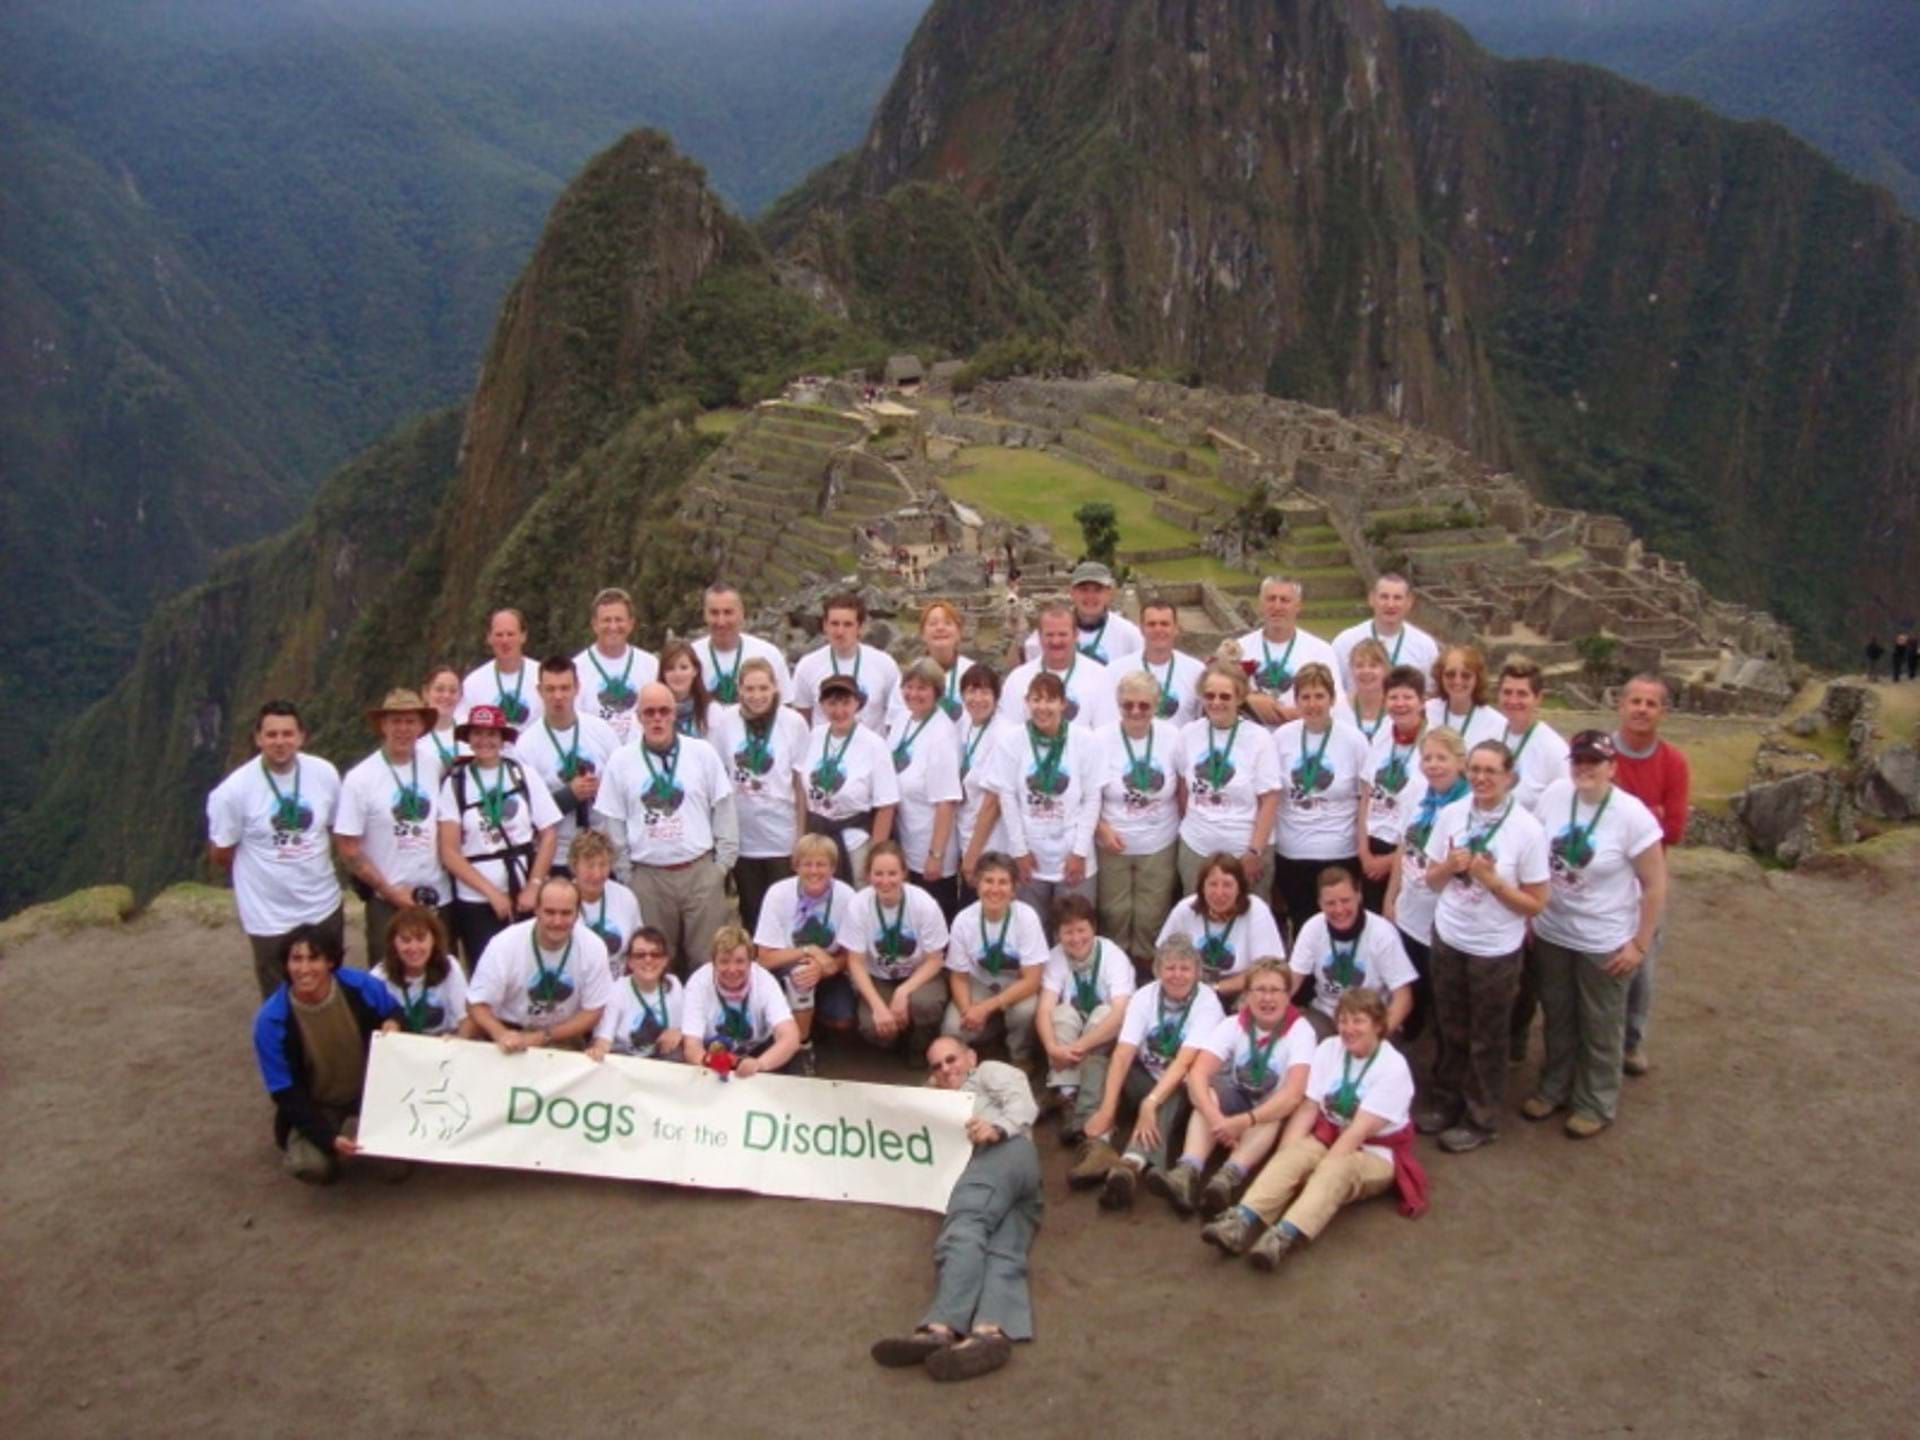 How did you celebrate after completing the challenge (both in Peru and when you got home)?